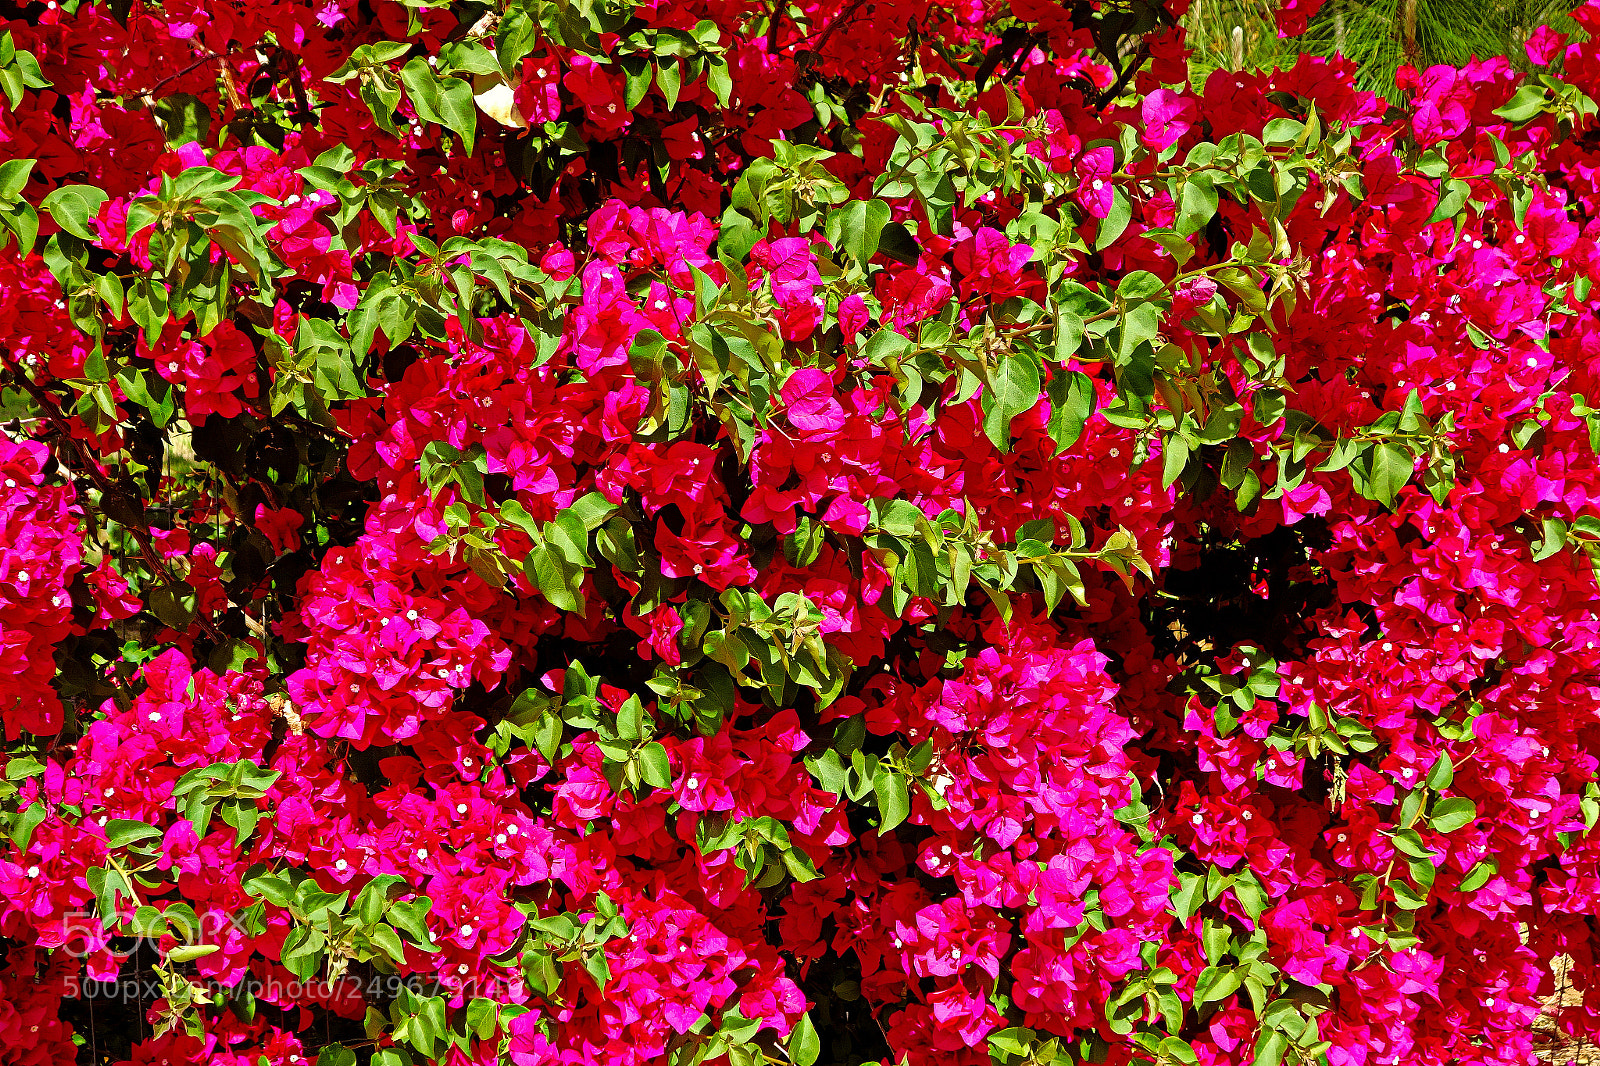 Sony Cyber-shot DSC-RX100 sample photo. Bougainvillea and foliage photography